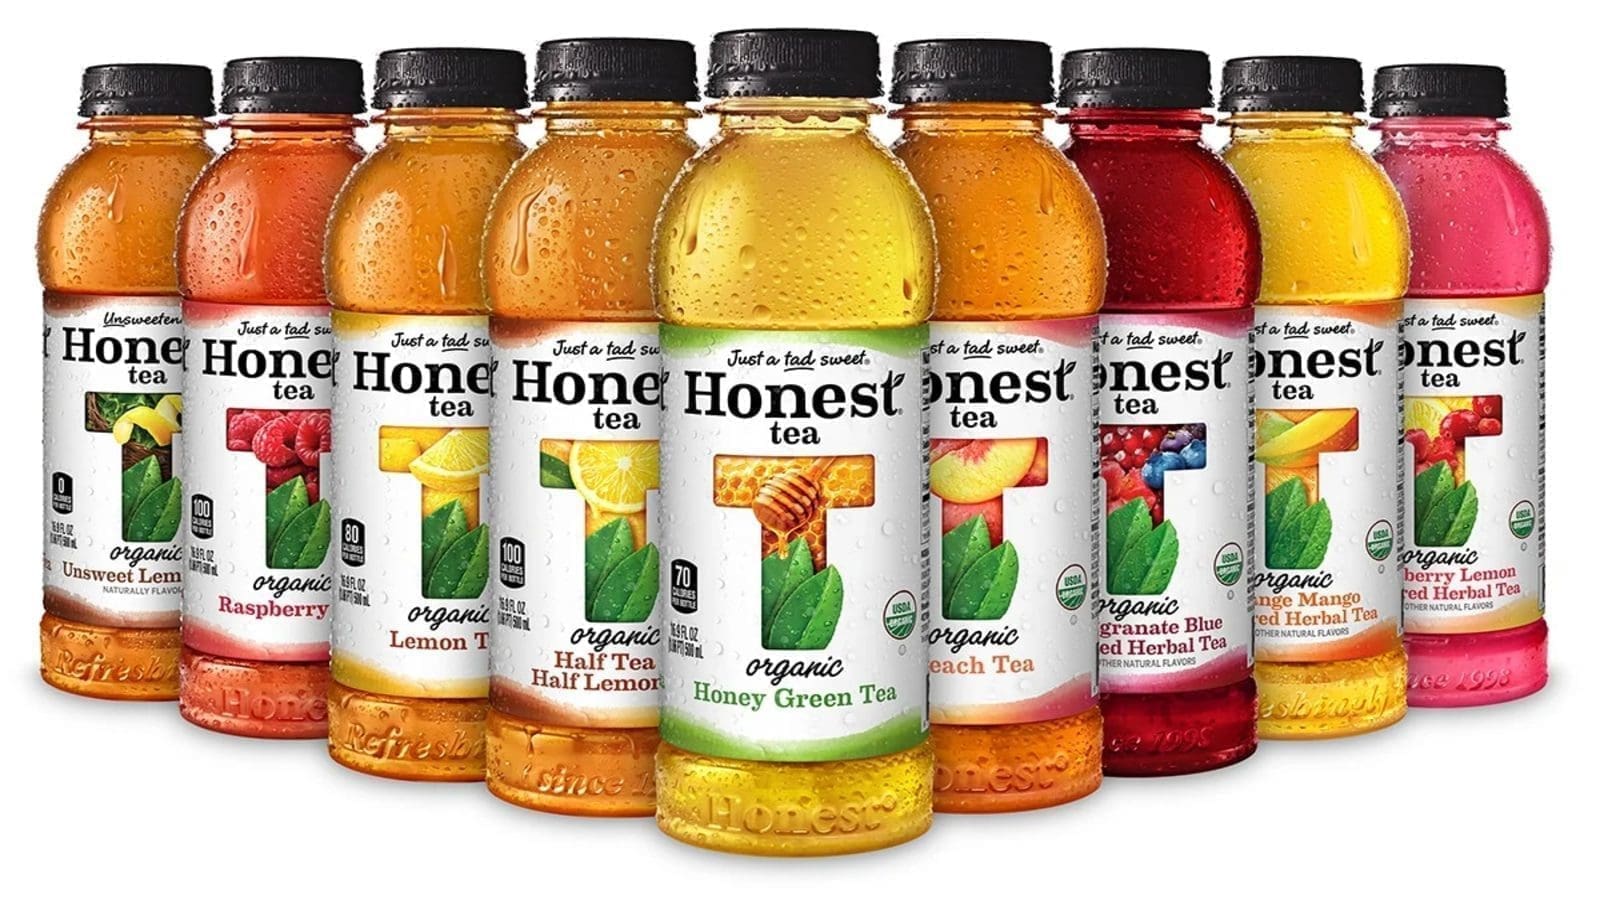 Once primed for discontinuation, Honest Tea finds home in India’s RTD tea beverage sector 